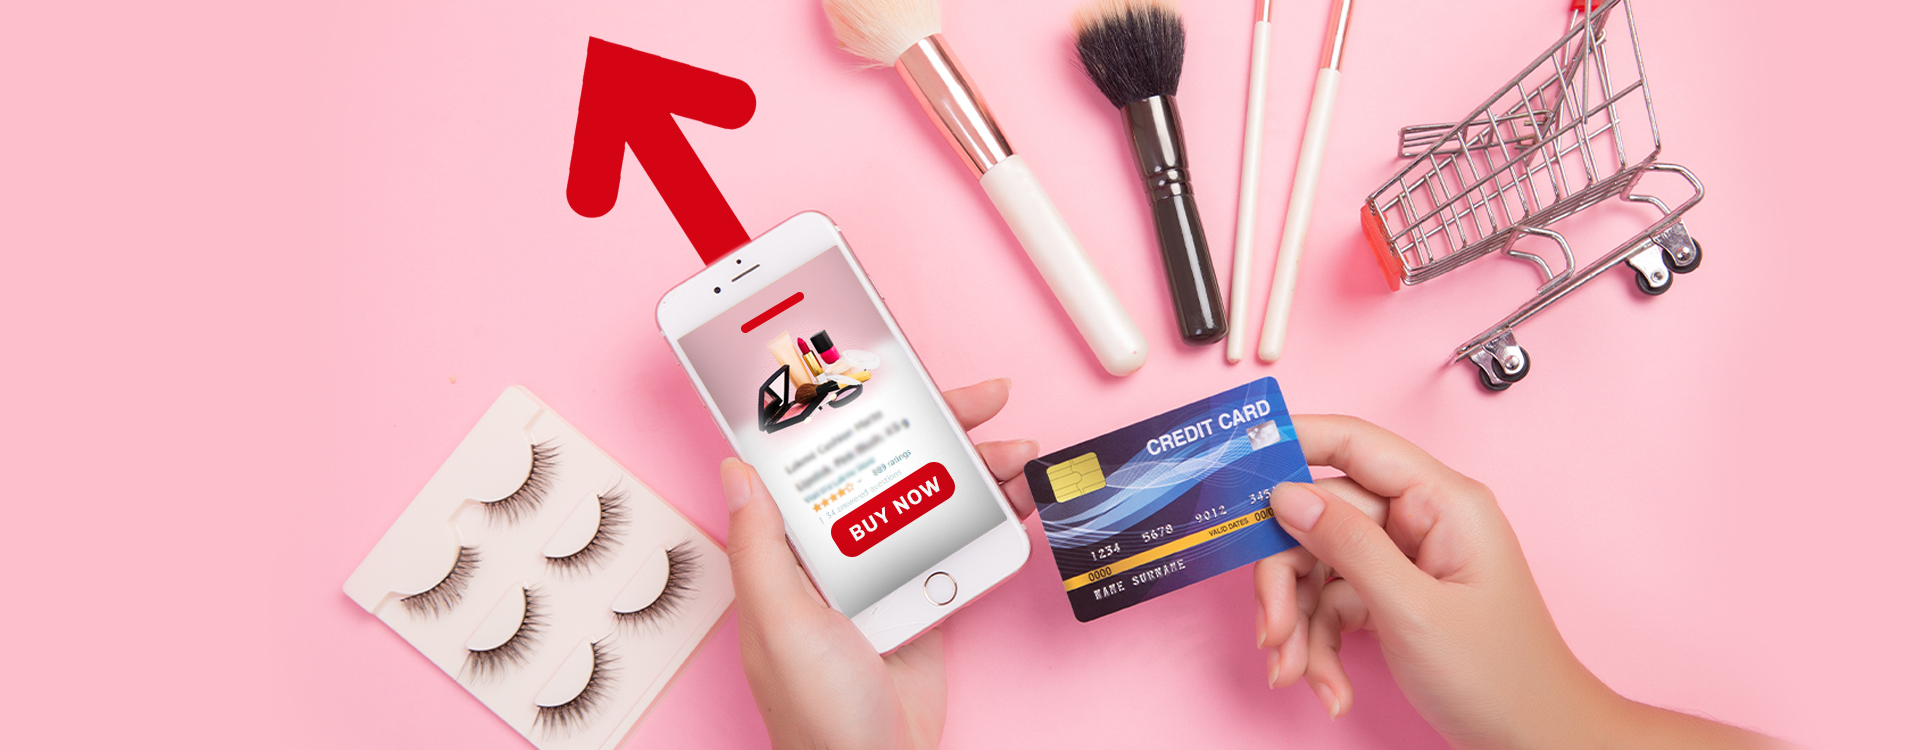 Online shoppers are currently browsing more social media content to buy beauty products which can be beneficial for the beauty brands.